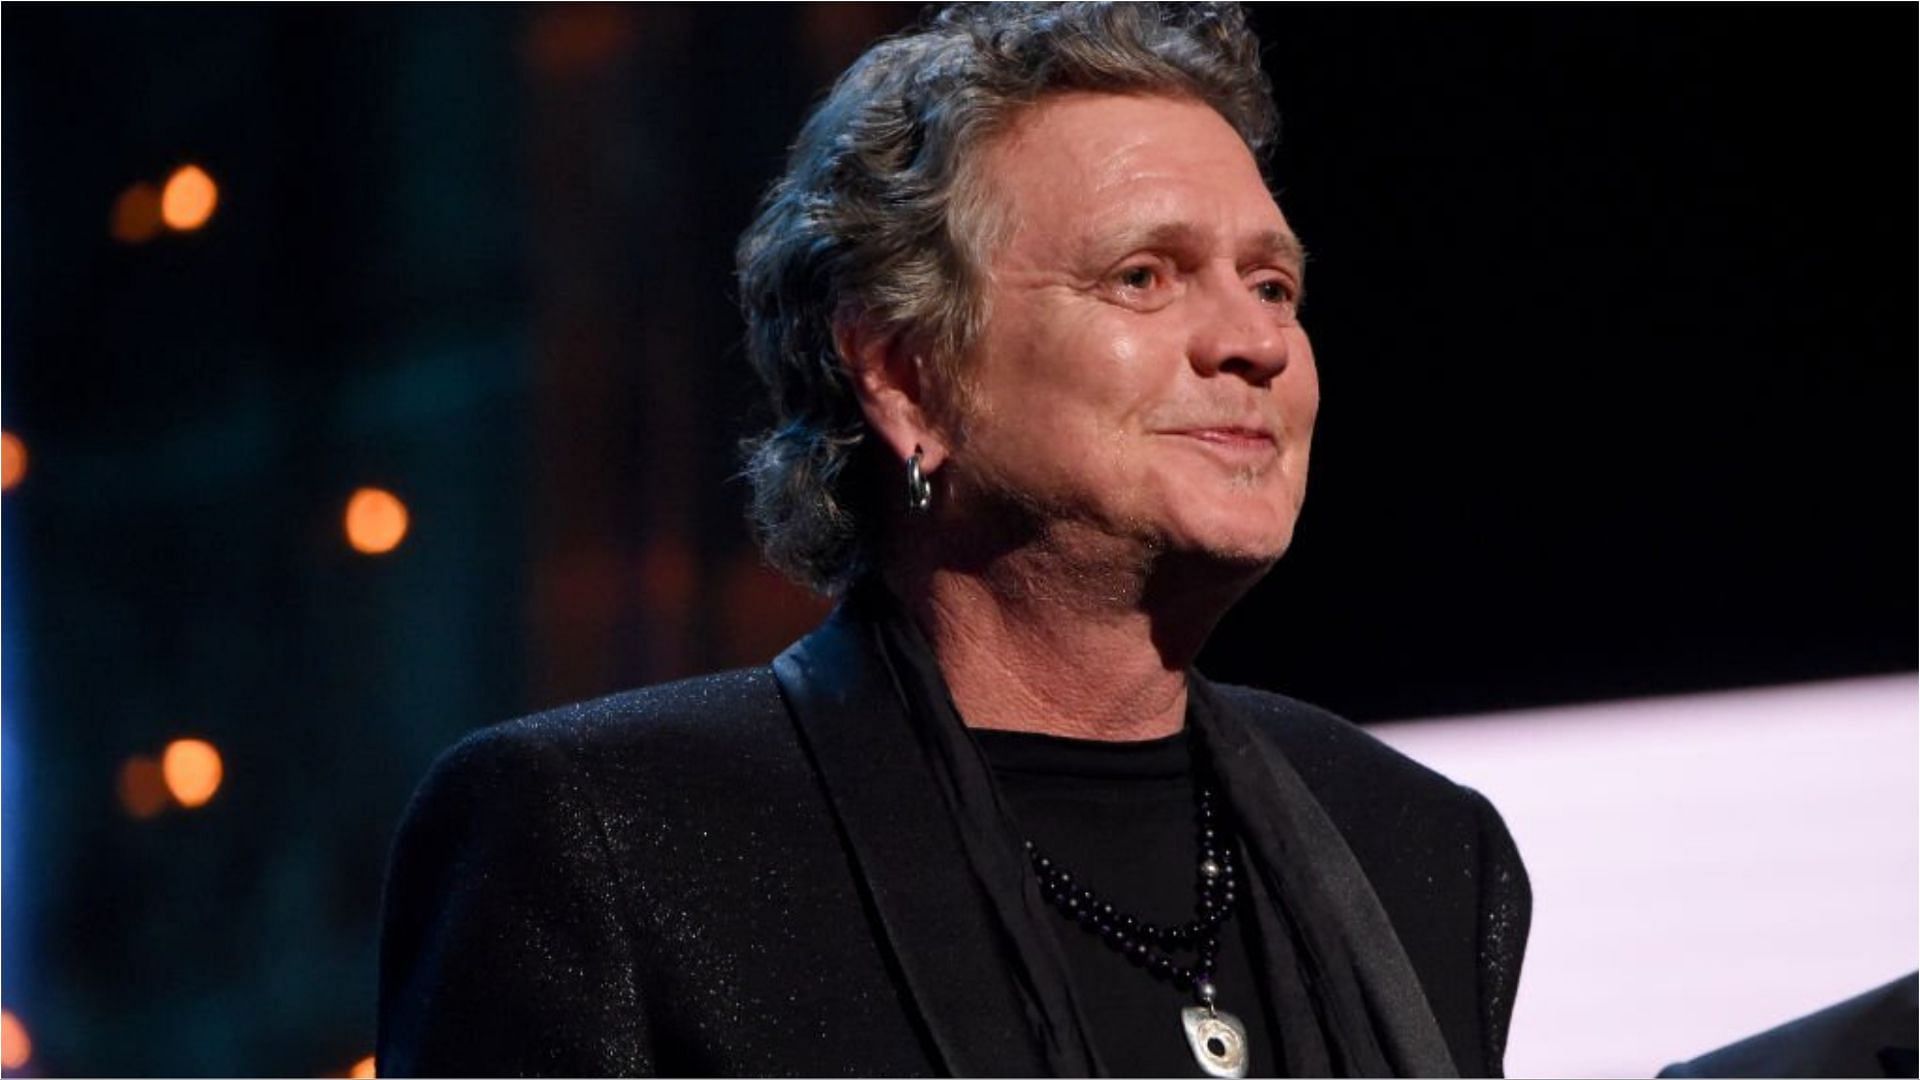 Rick Allen has spoken up on the assault incident that happened a few days ago (Image via Kevin Mazur/Getty Images)